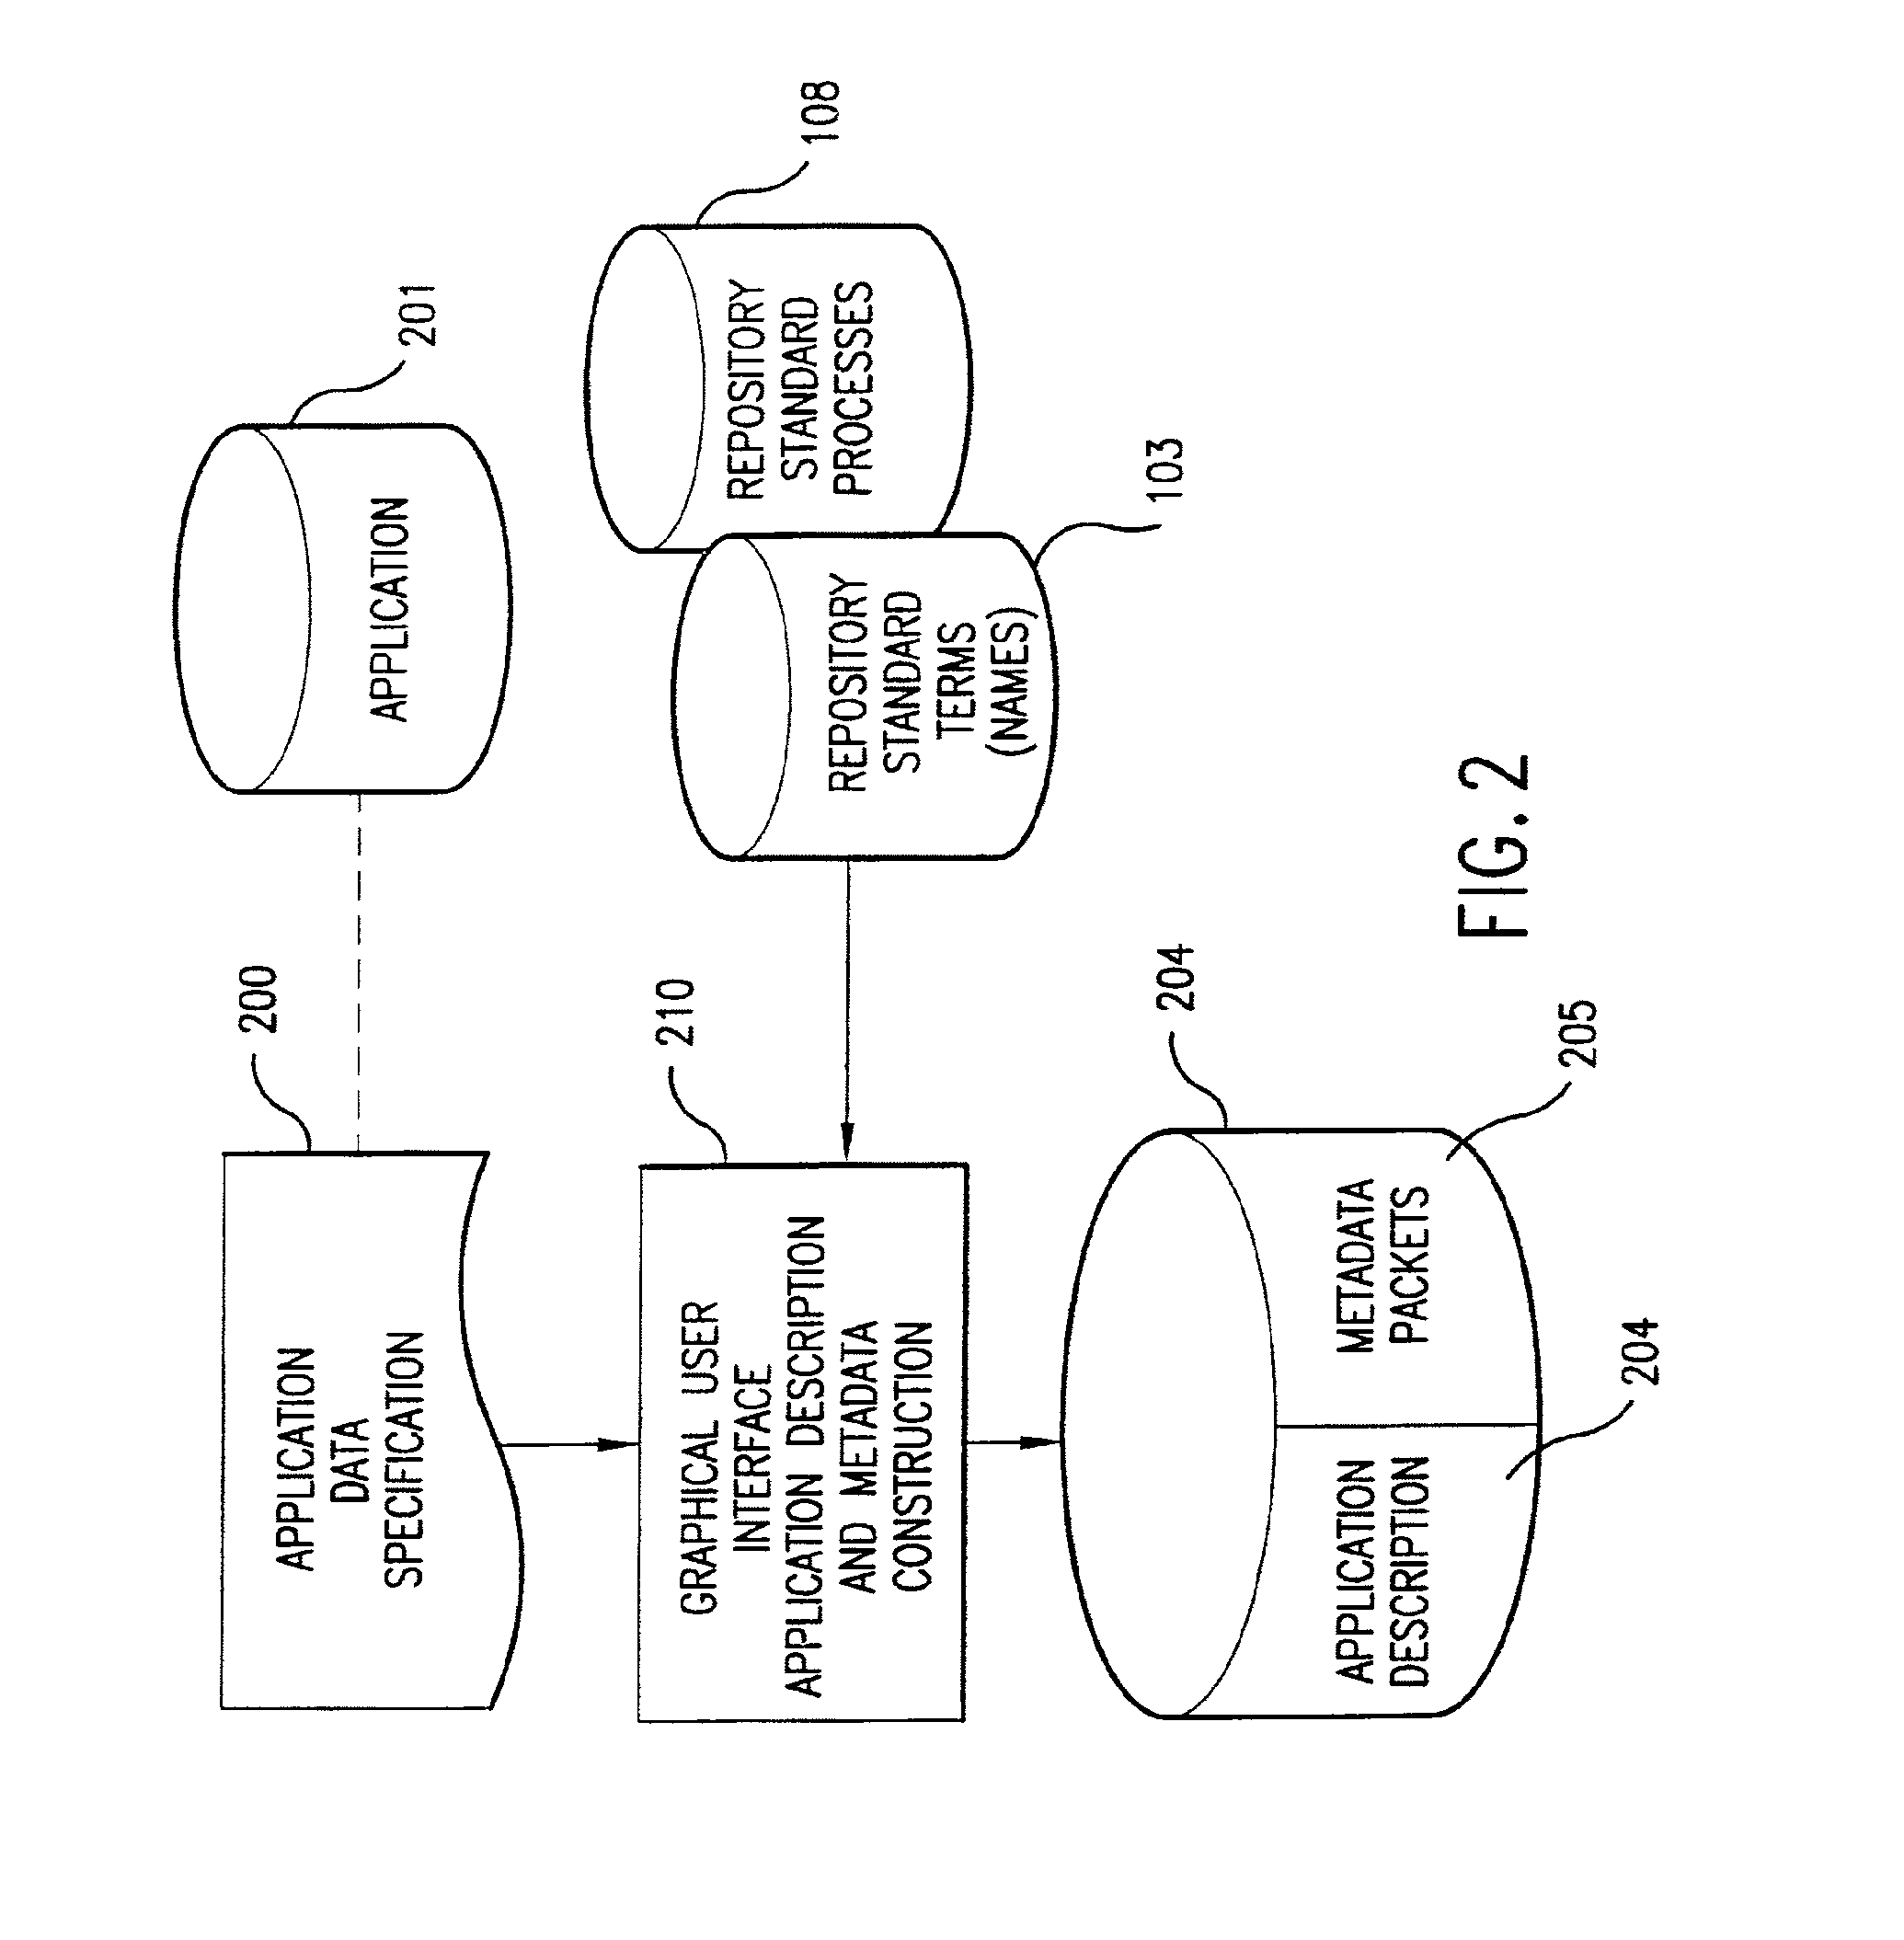 Method and system for transferring information using metabase